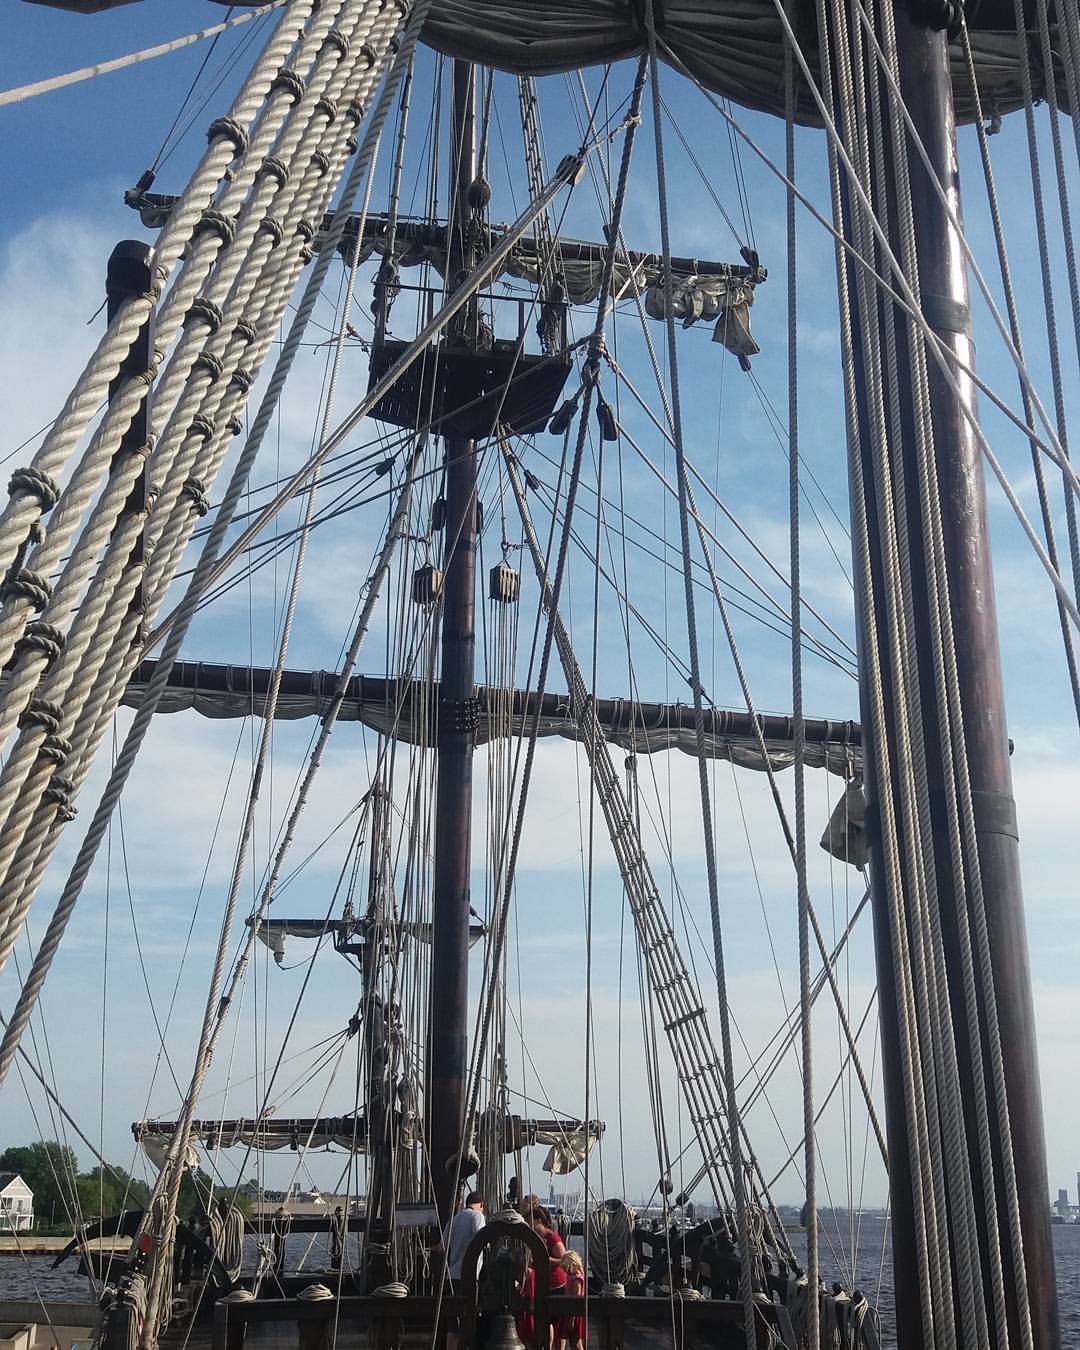 avaneshop:
“ On board the #elgaleon before they leave today. I’m glad they stuck around a couple extra days so people like me (who hates crowds) could get a chance to tour. It was amazing!
#tallships #duluth #duluthmn #authenticduluth (at Tall Ships...